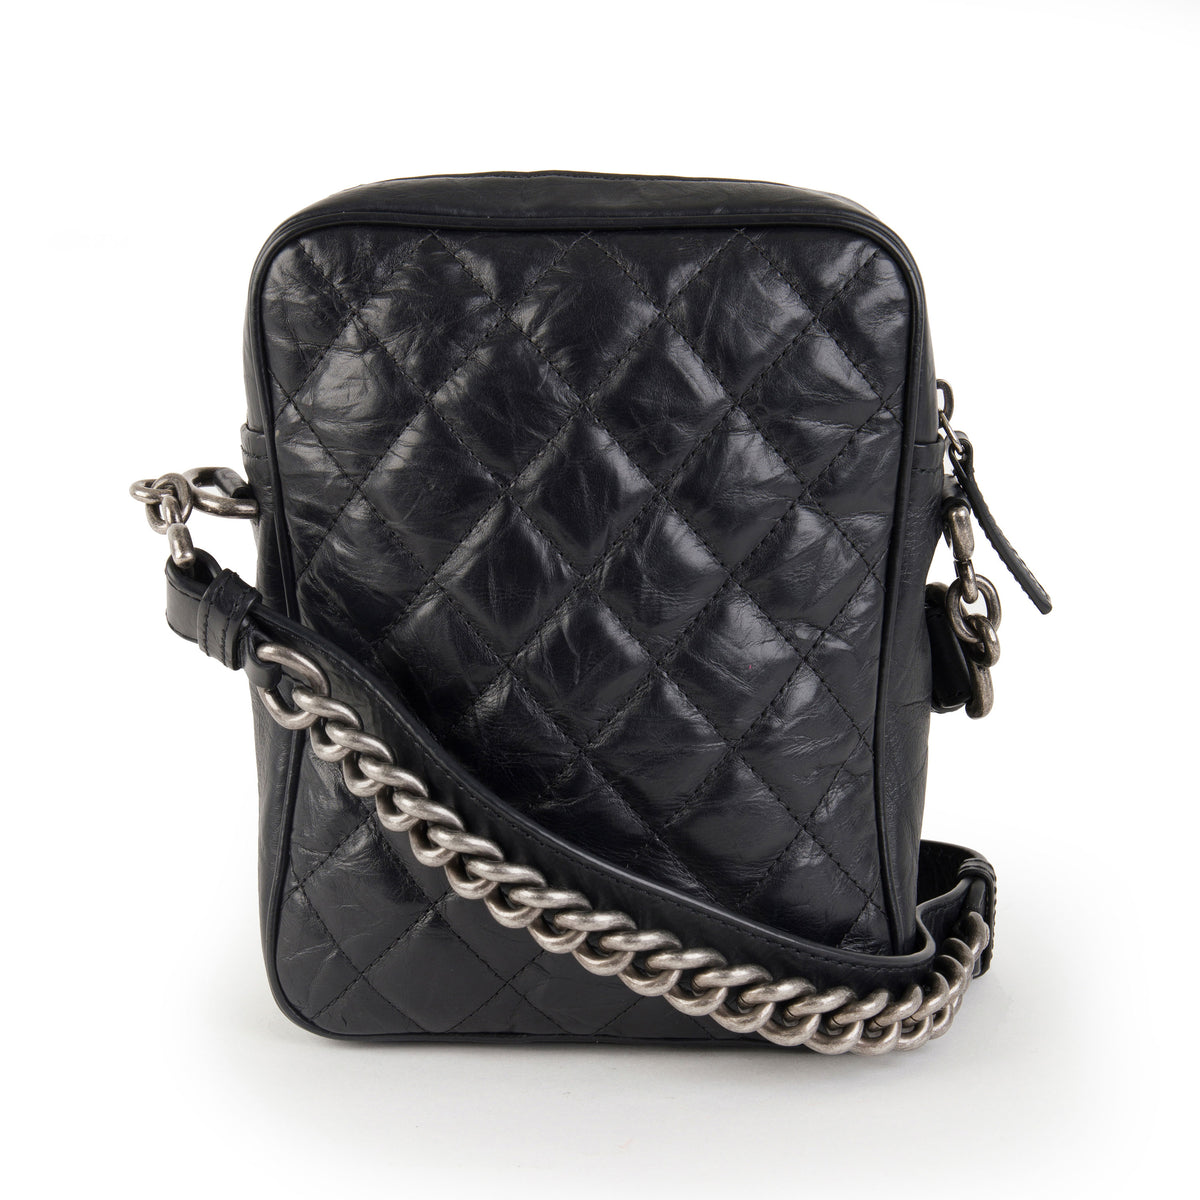 CHANEL City Rock Quilted Leather Shopping Tote Bag Blue- 10% OFF